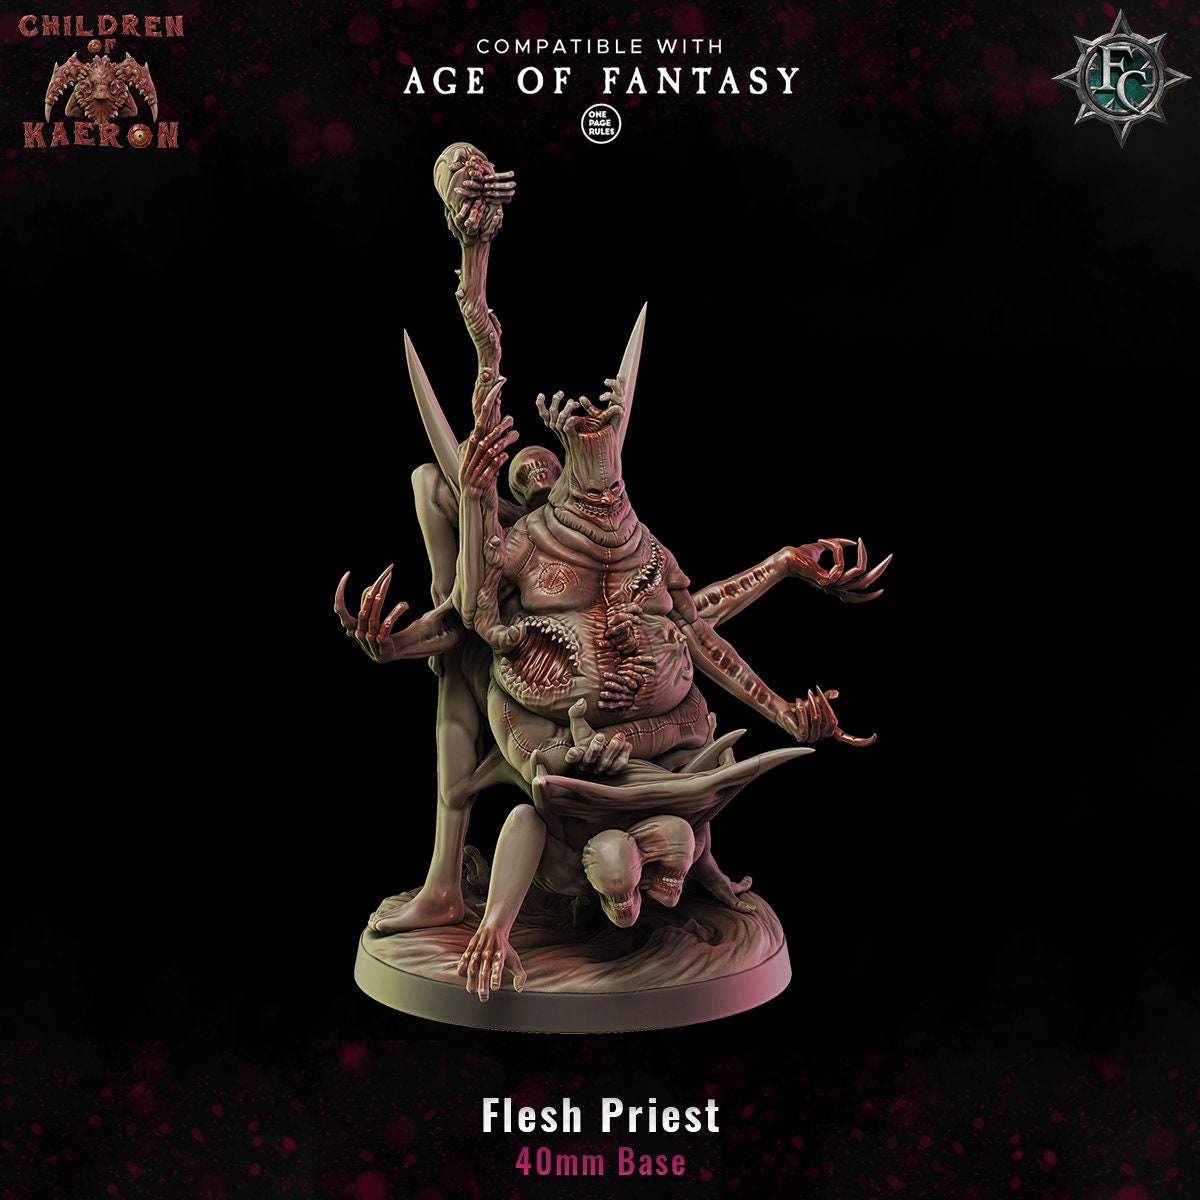 a figurine of a demon holding a ball